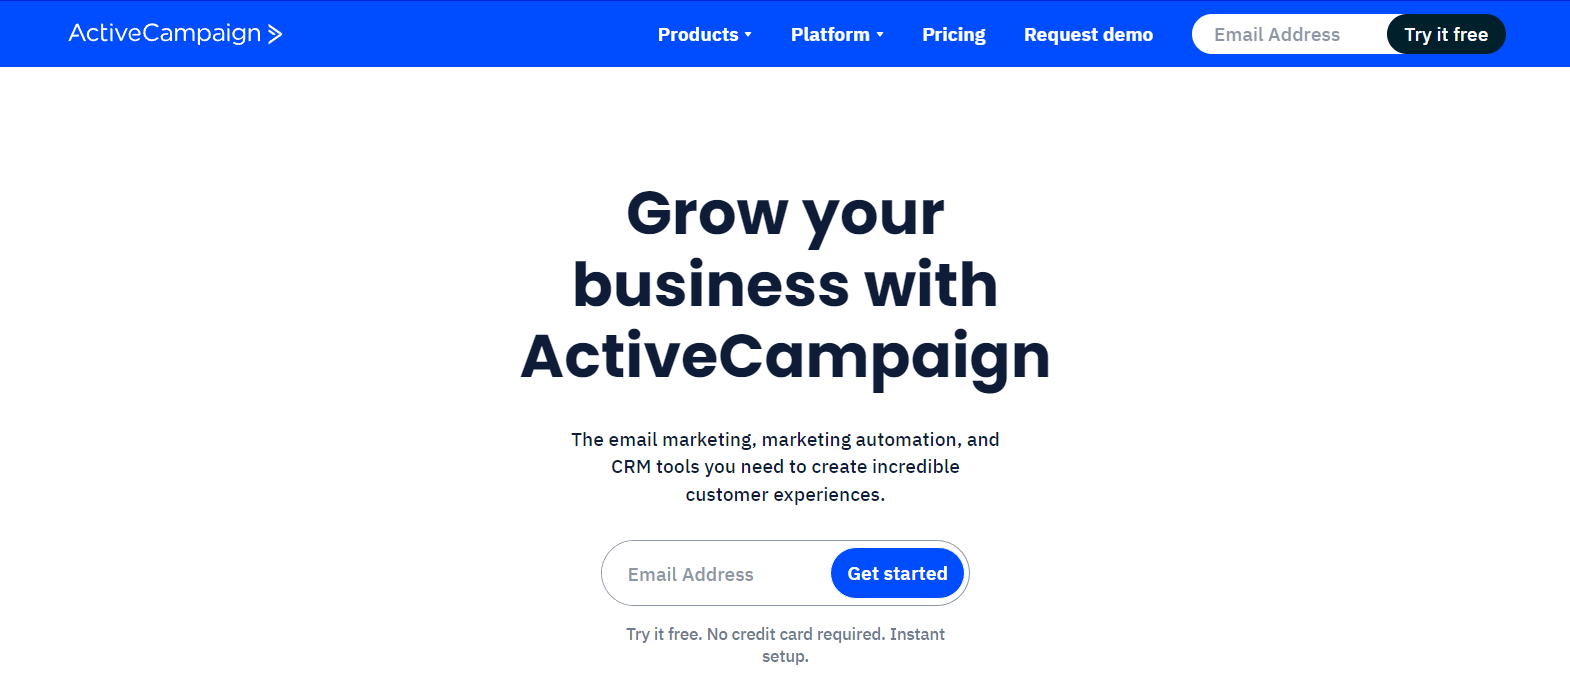 ActiveCampaign offers email marketing, automation, CRM tools, and more